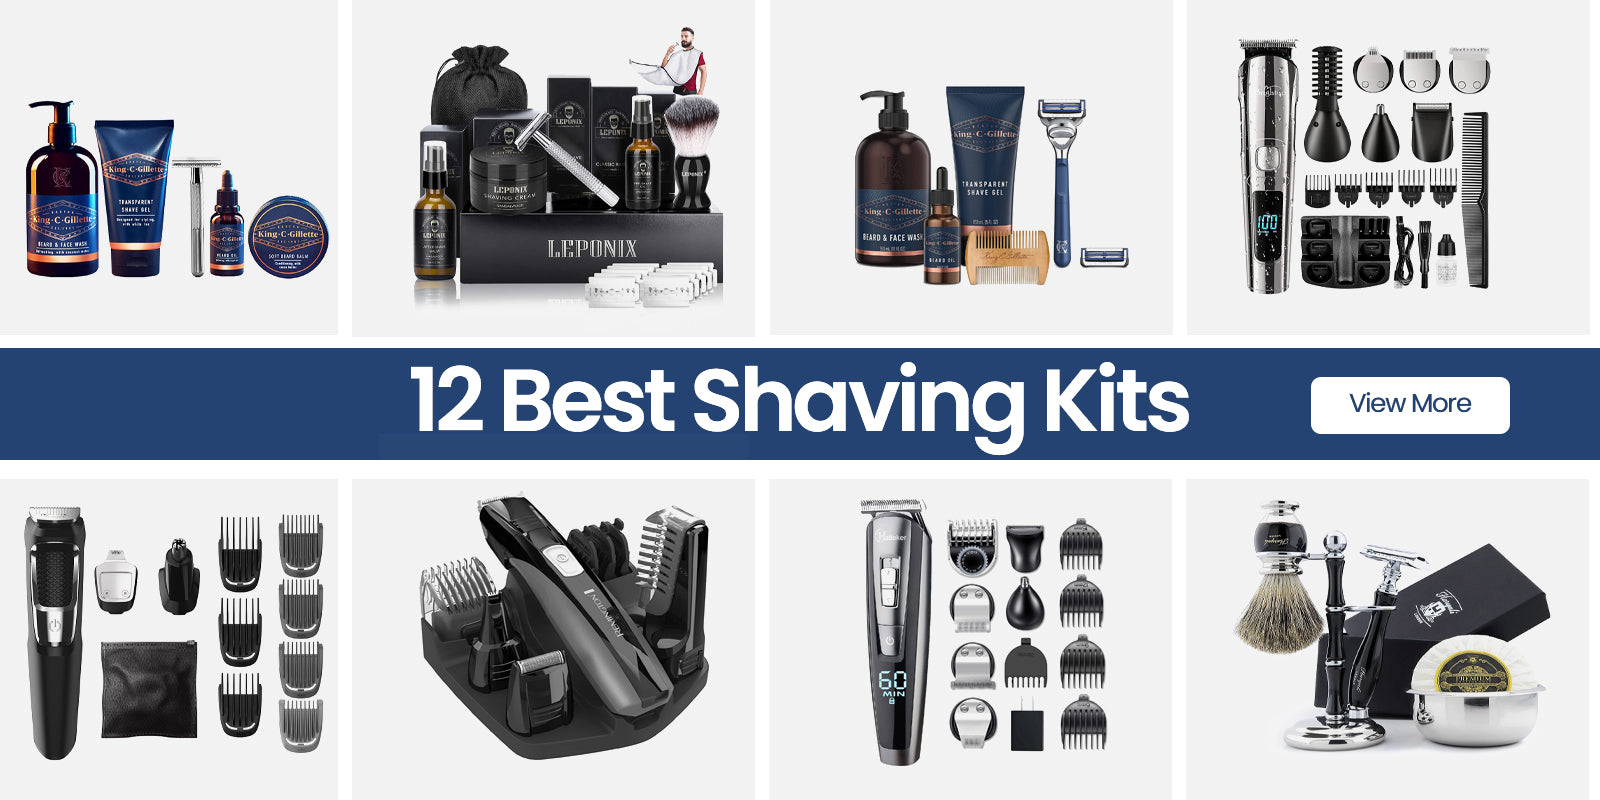 CLASSIC SHAVE KIT - T. Anthony